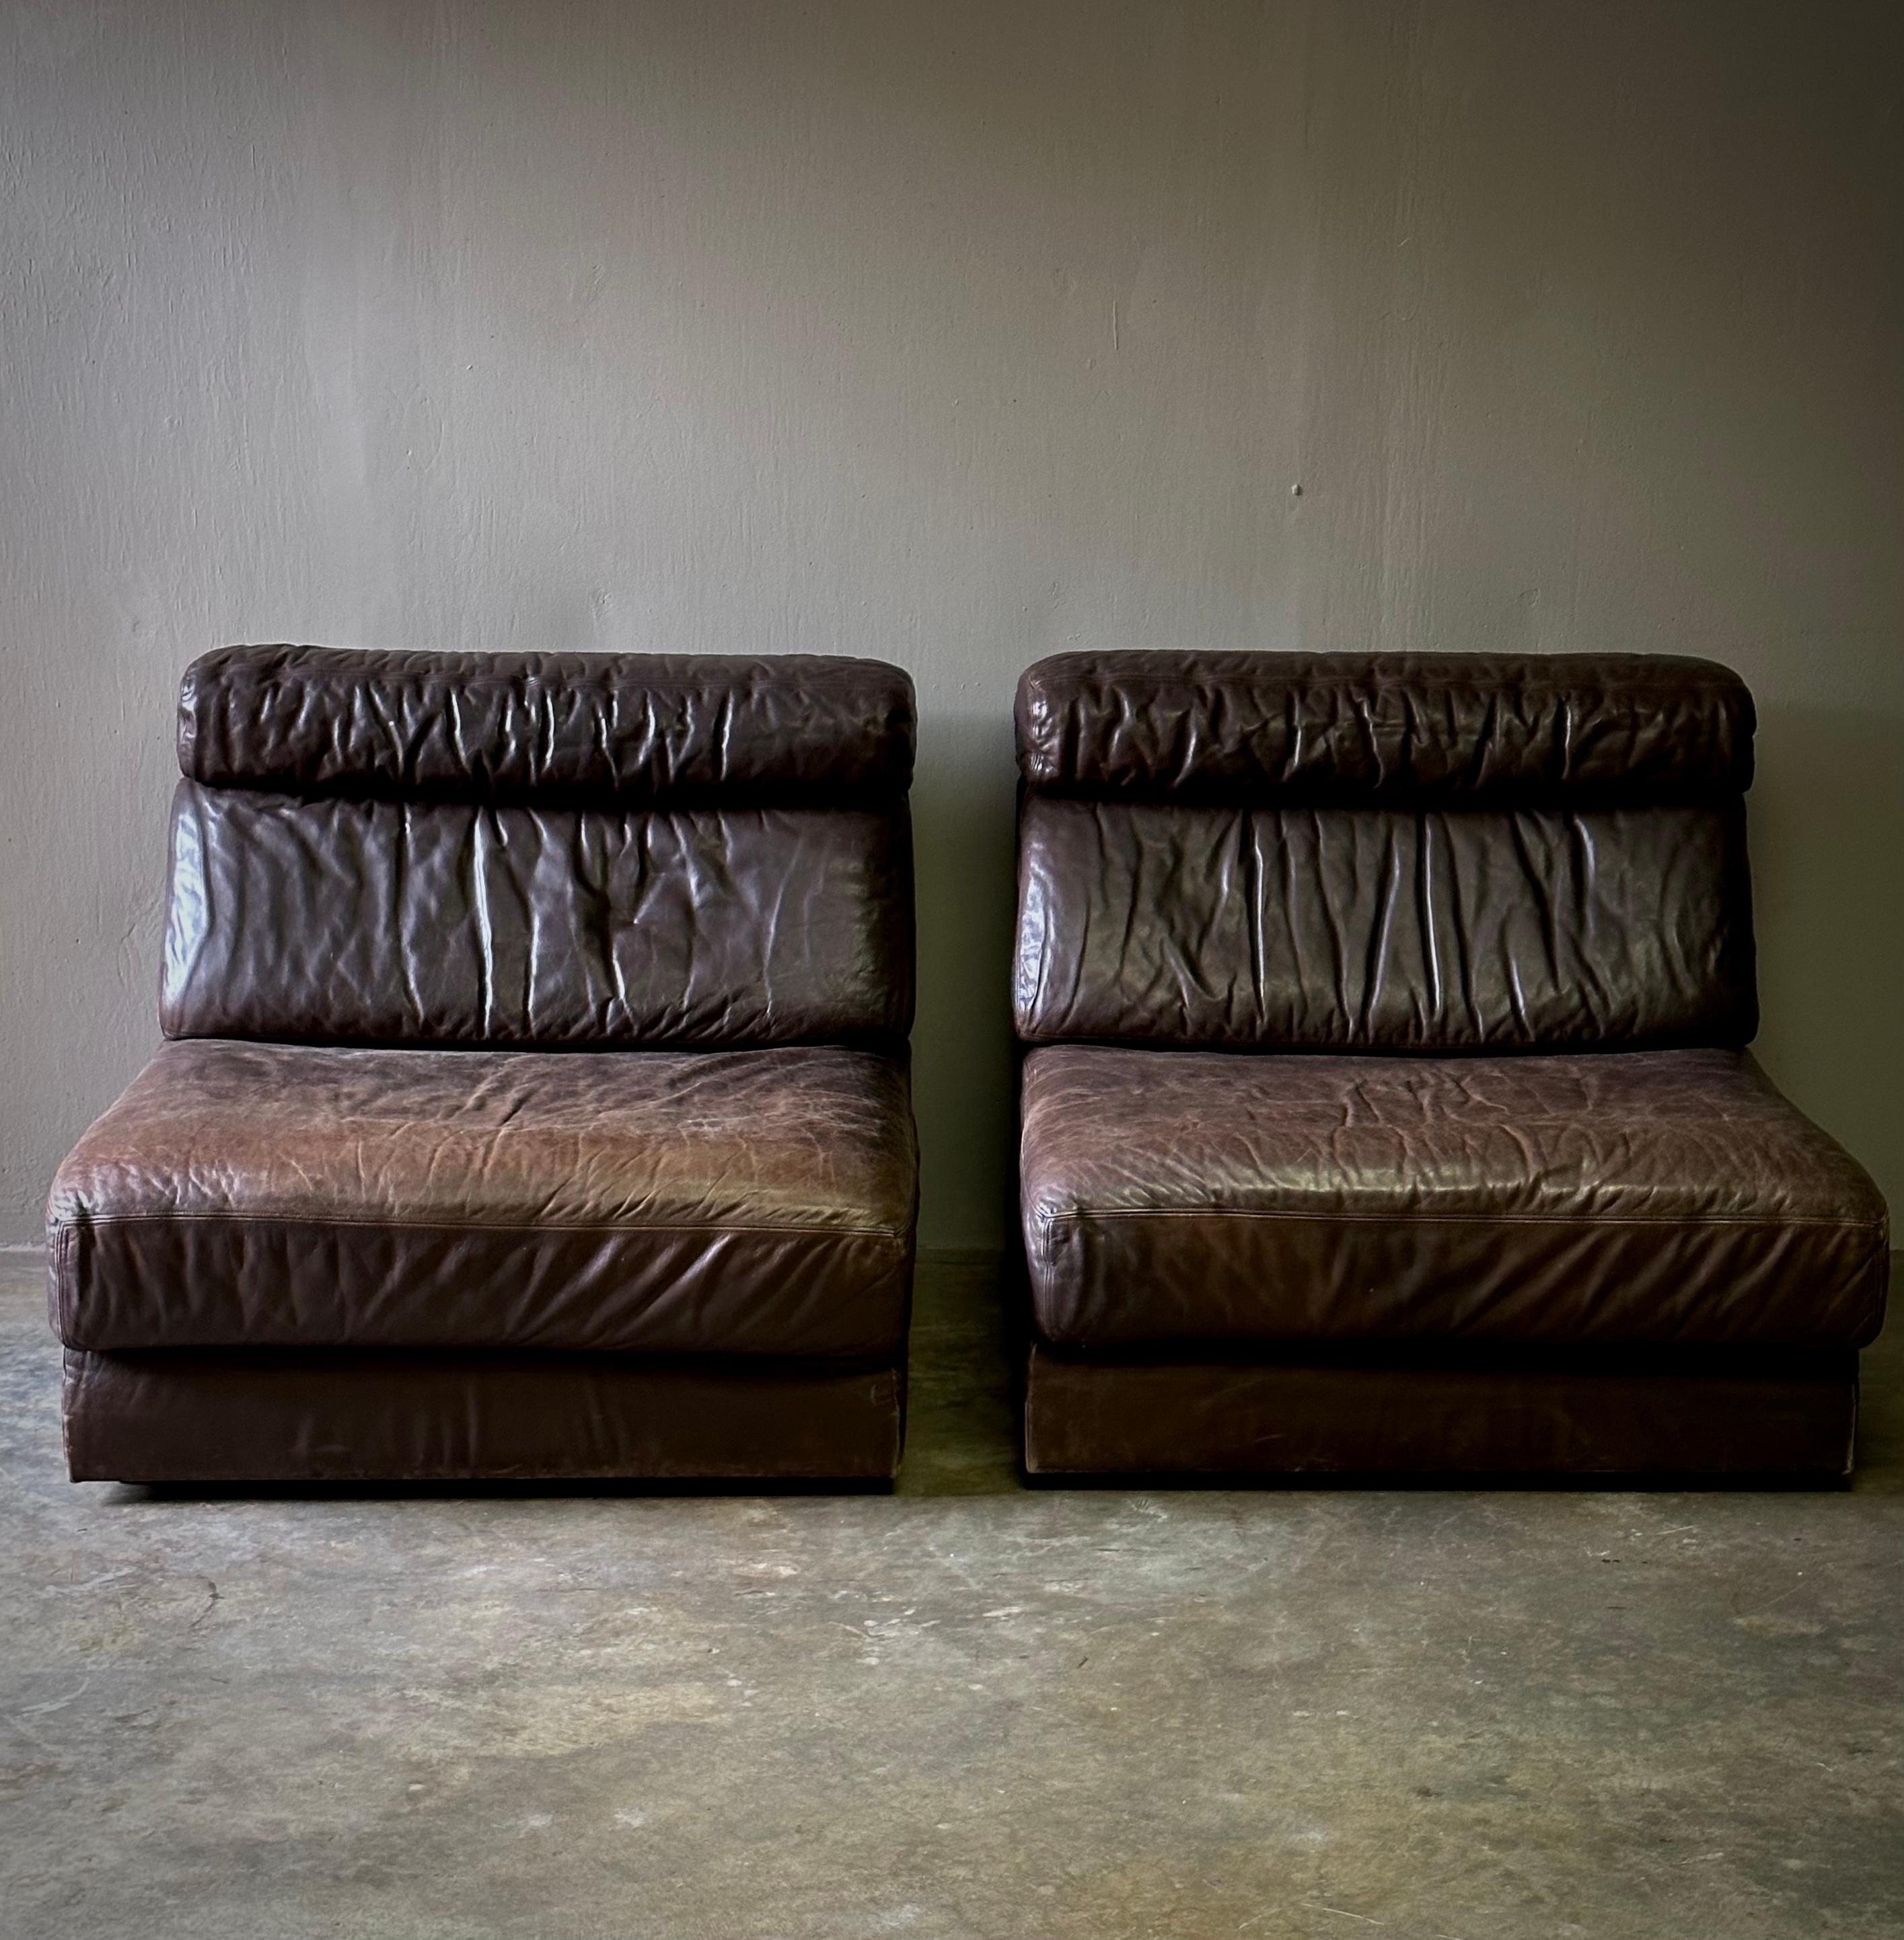 Pair of convertible 1960s De Sede lounge chairs in original chocolate brown leather. Chic, understated, and exceptionally comfortable, the pair unfolds to extend into reclining day-beds. Would work especially well in an office or guest space. The